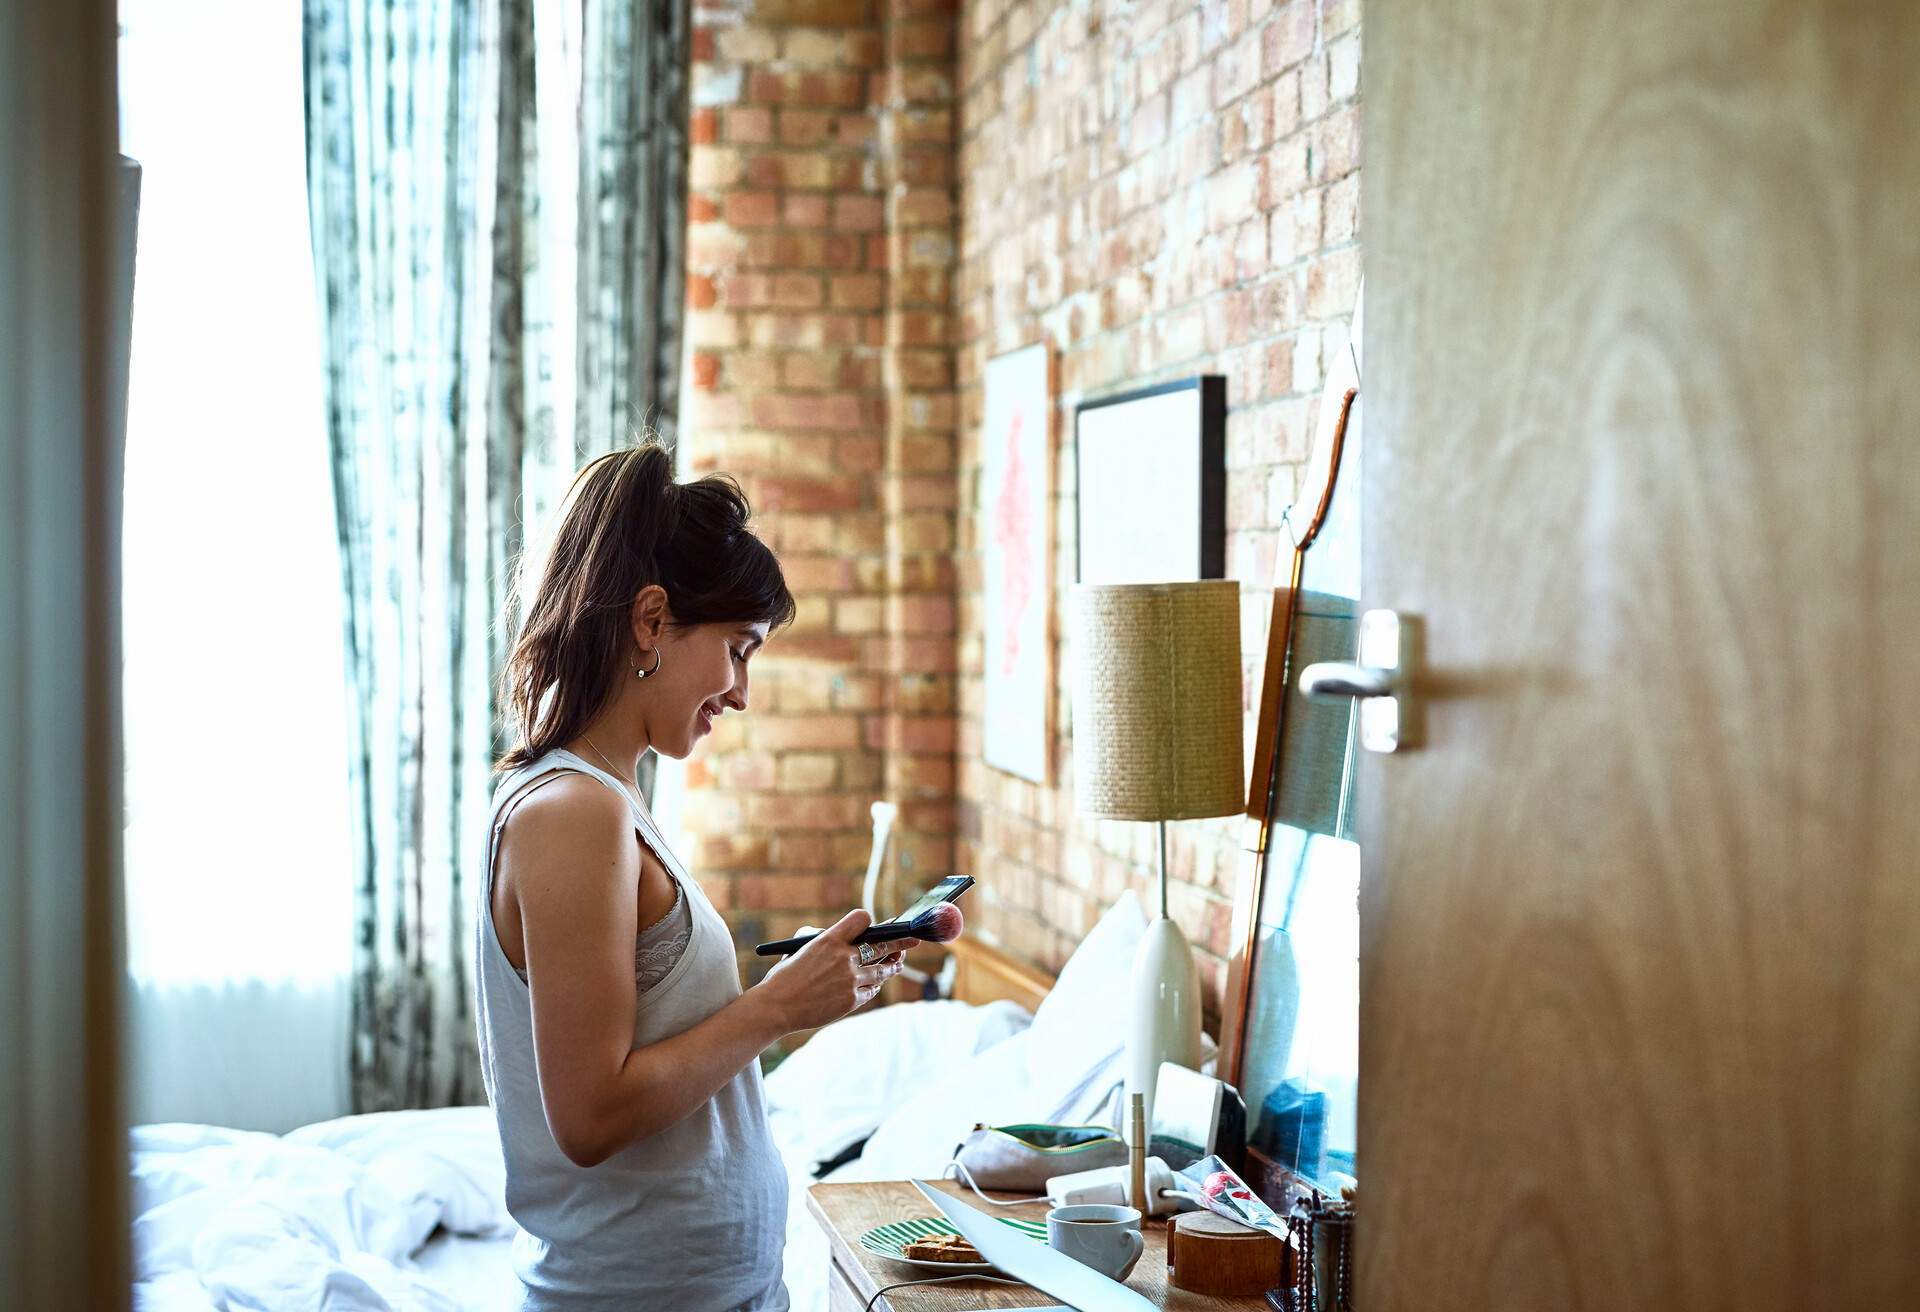 THEME_HOTEL_PEOPLE_WOMAN_LOOKING-AT-PHONE_DEVICE_GettyImages-1006503826